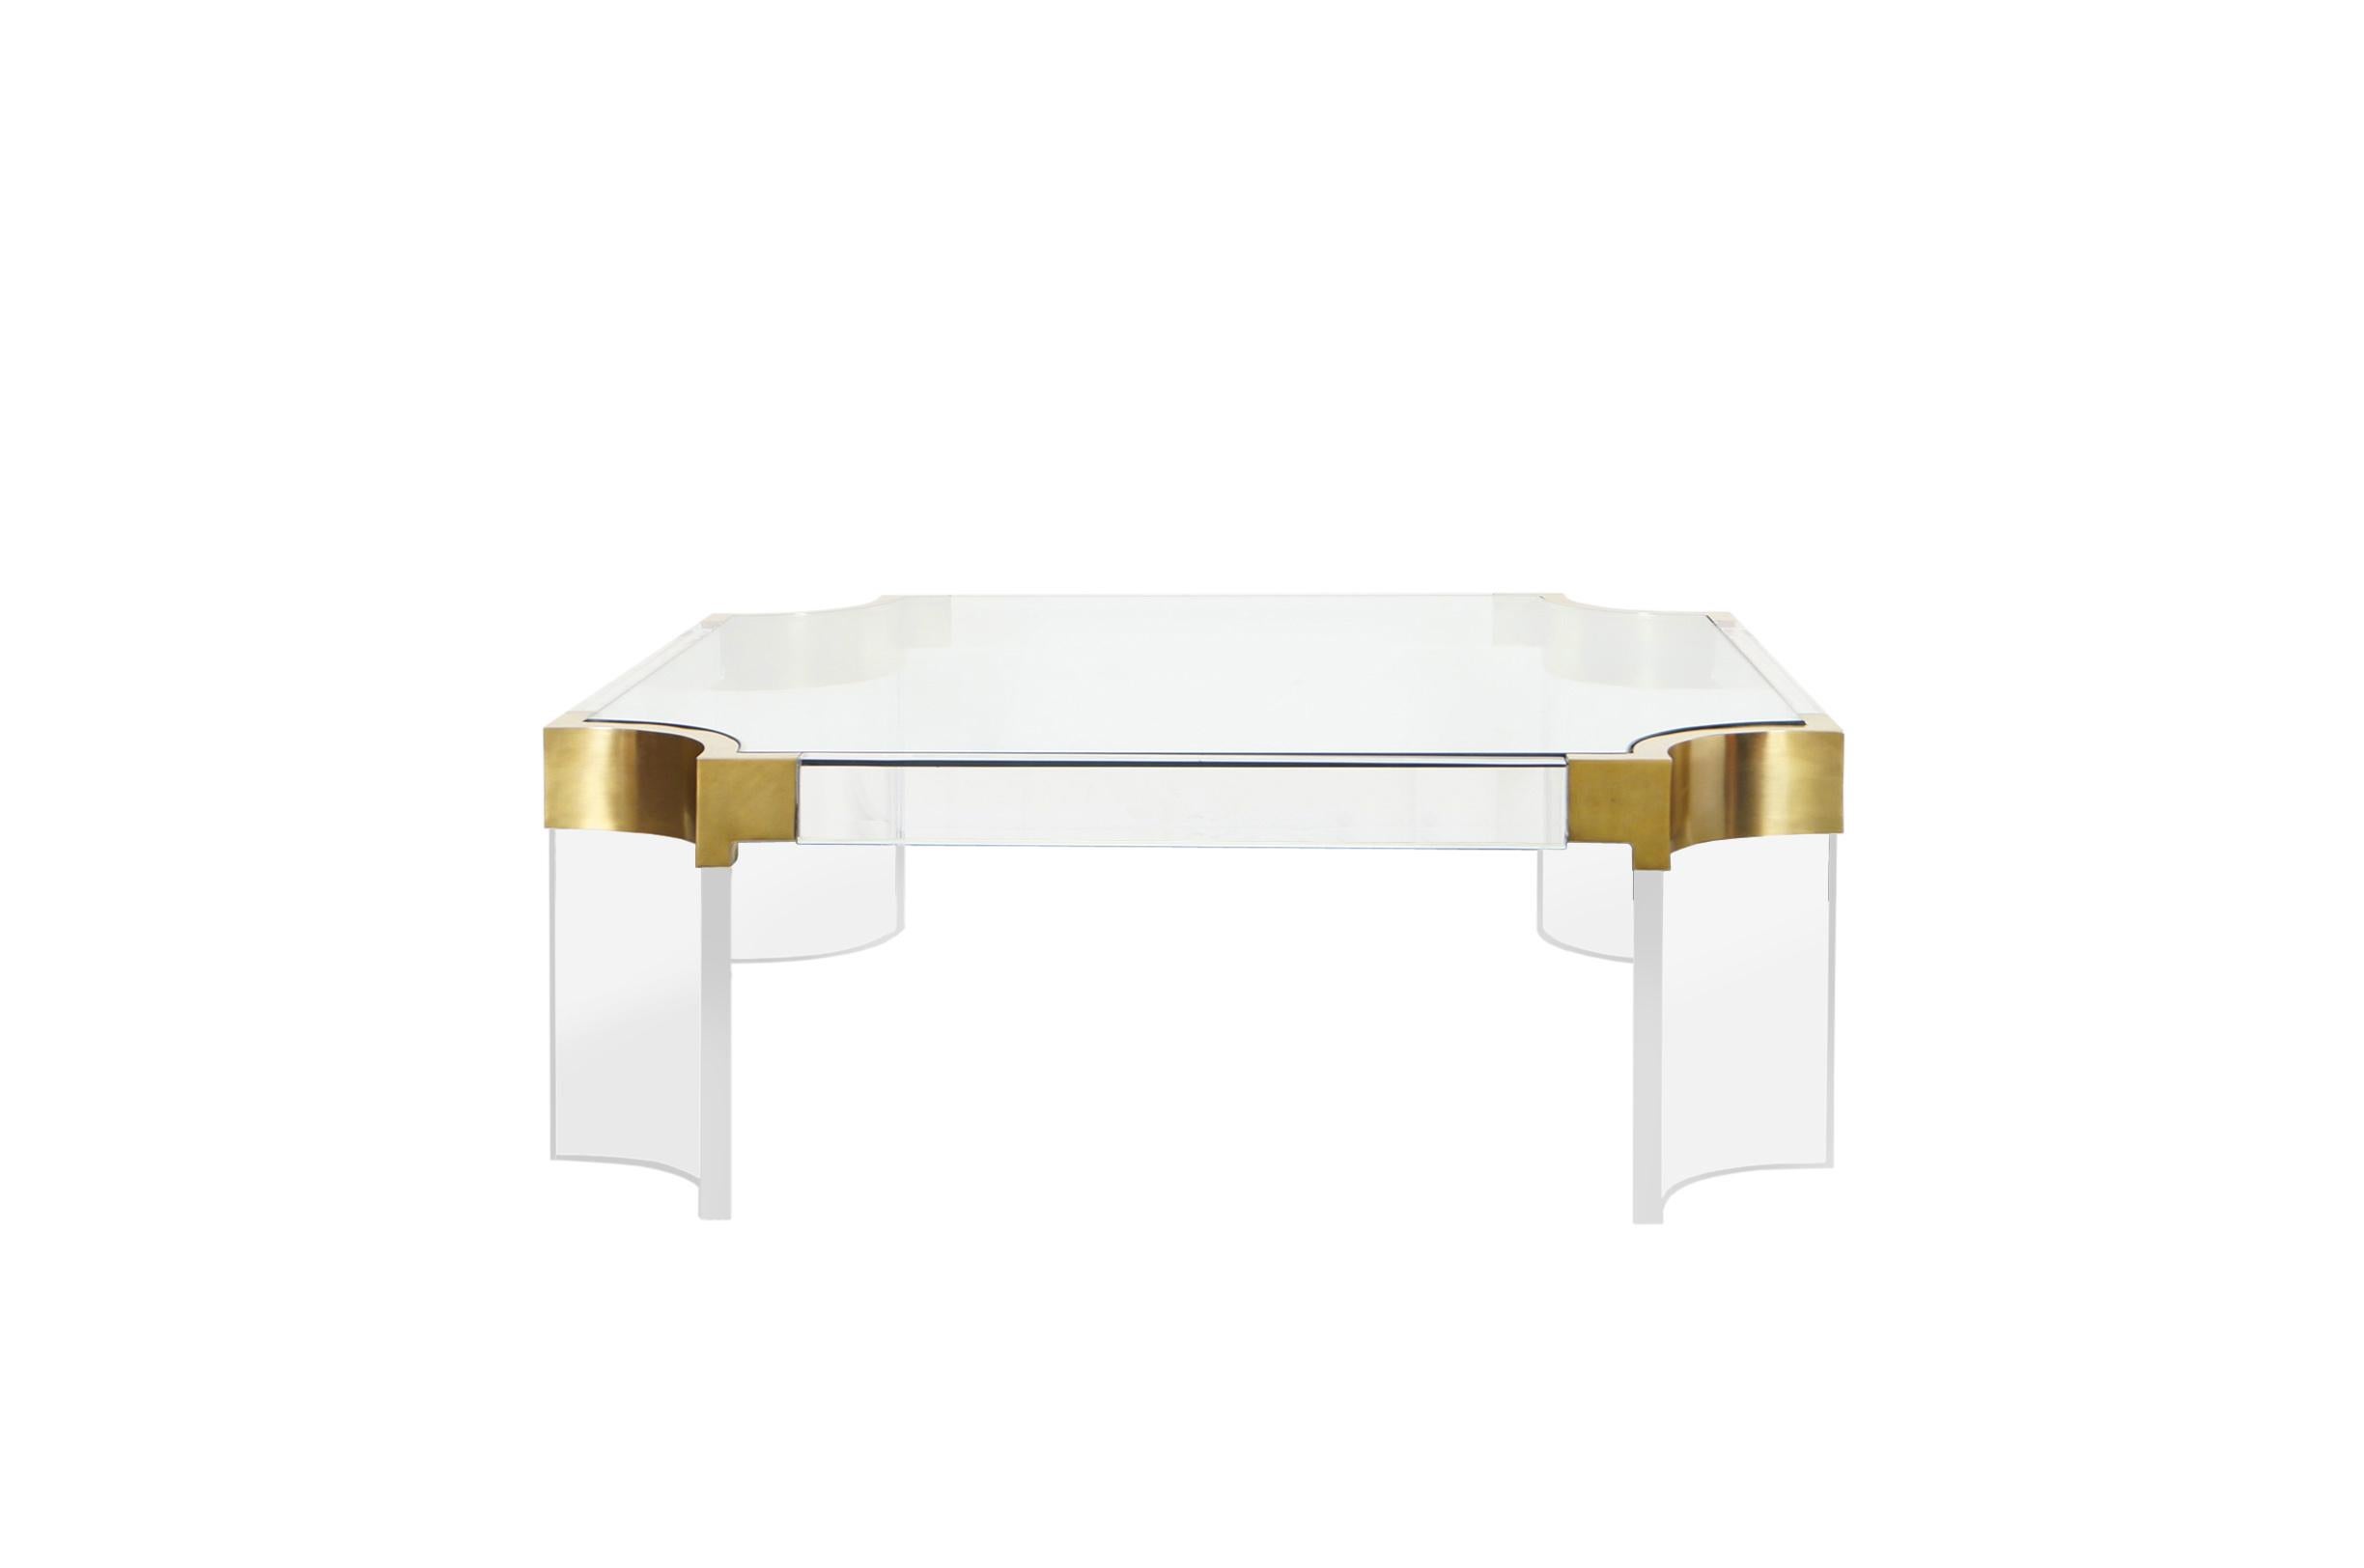 Exceptional Lucite and brass coffee table designed by Charles Hollis Jones for the Waterfall Line. The coffee table has emphasis on gracefulness, softness, and elegance.